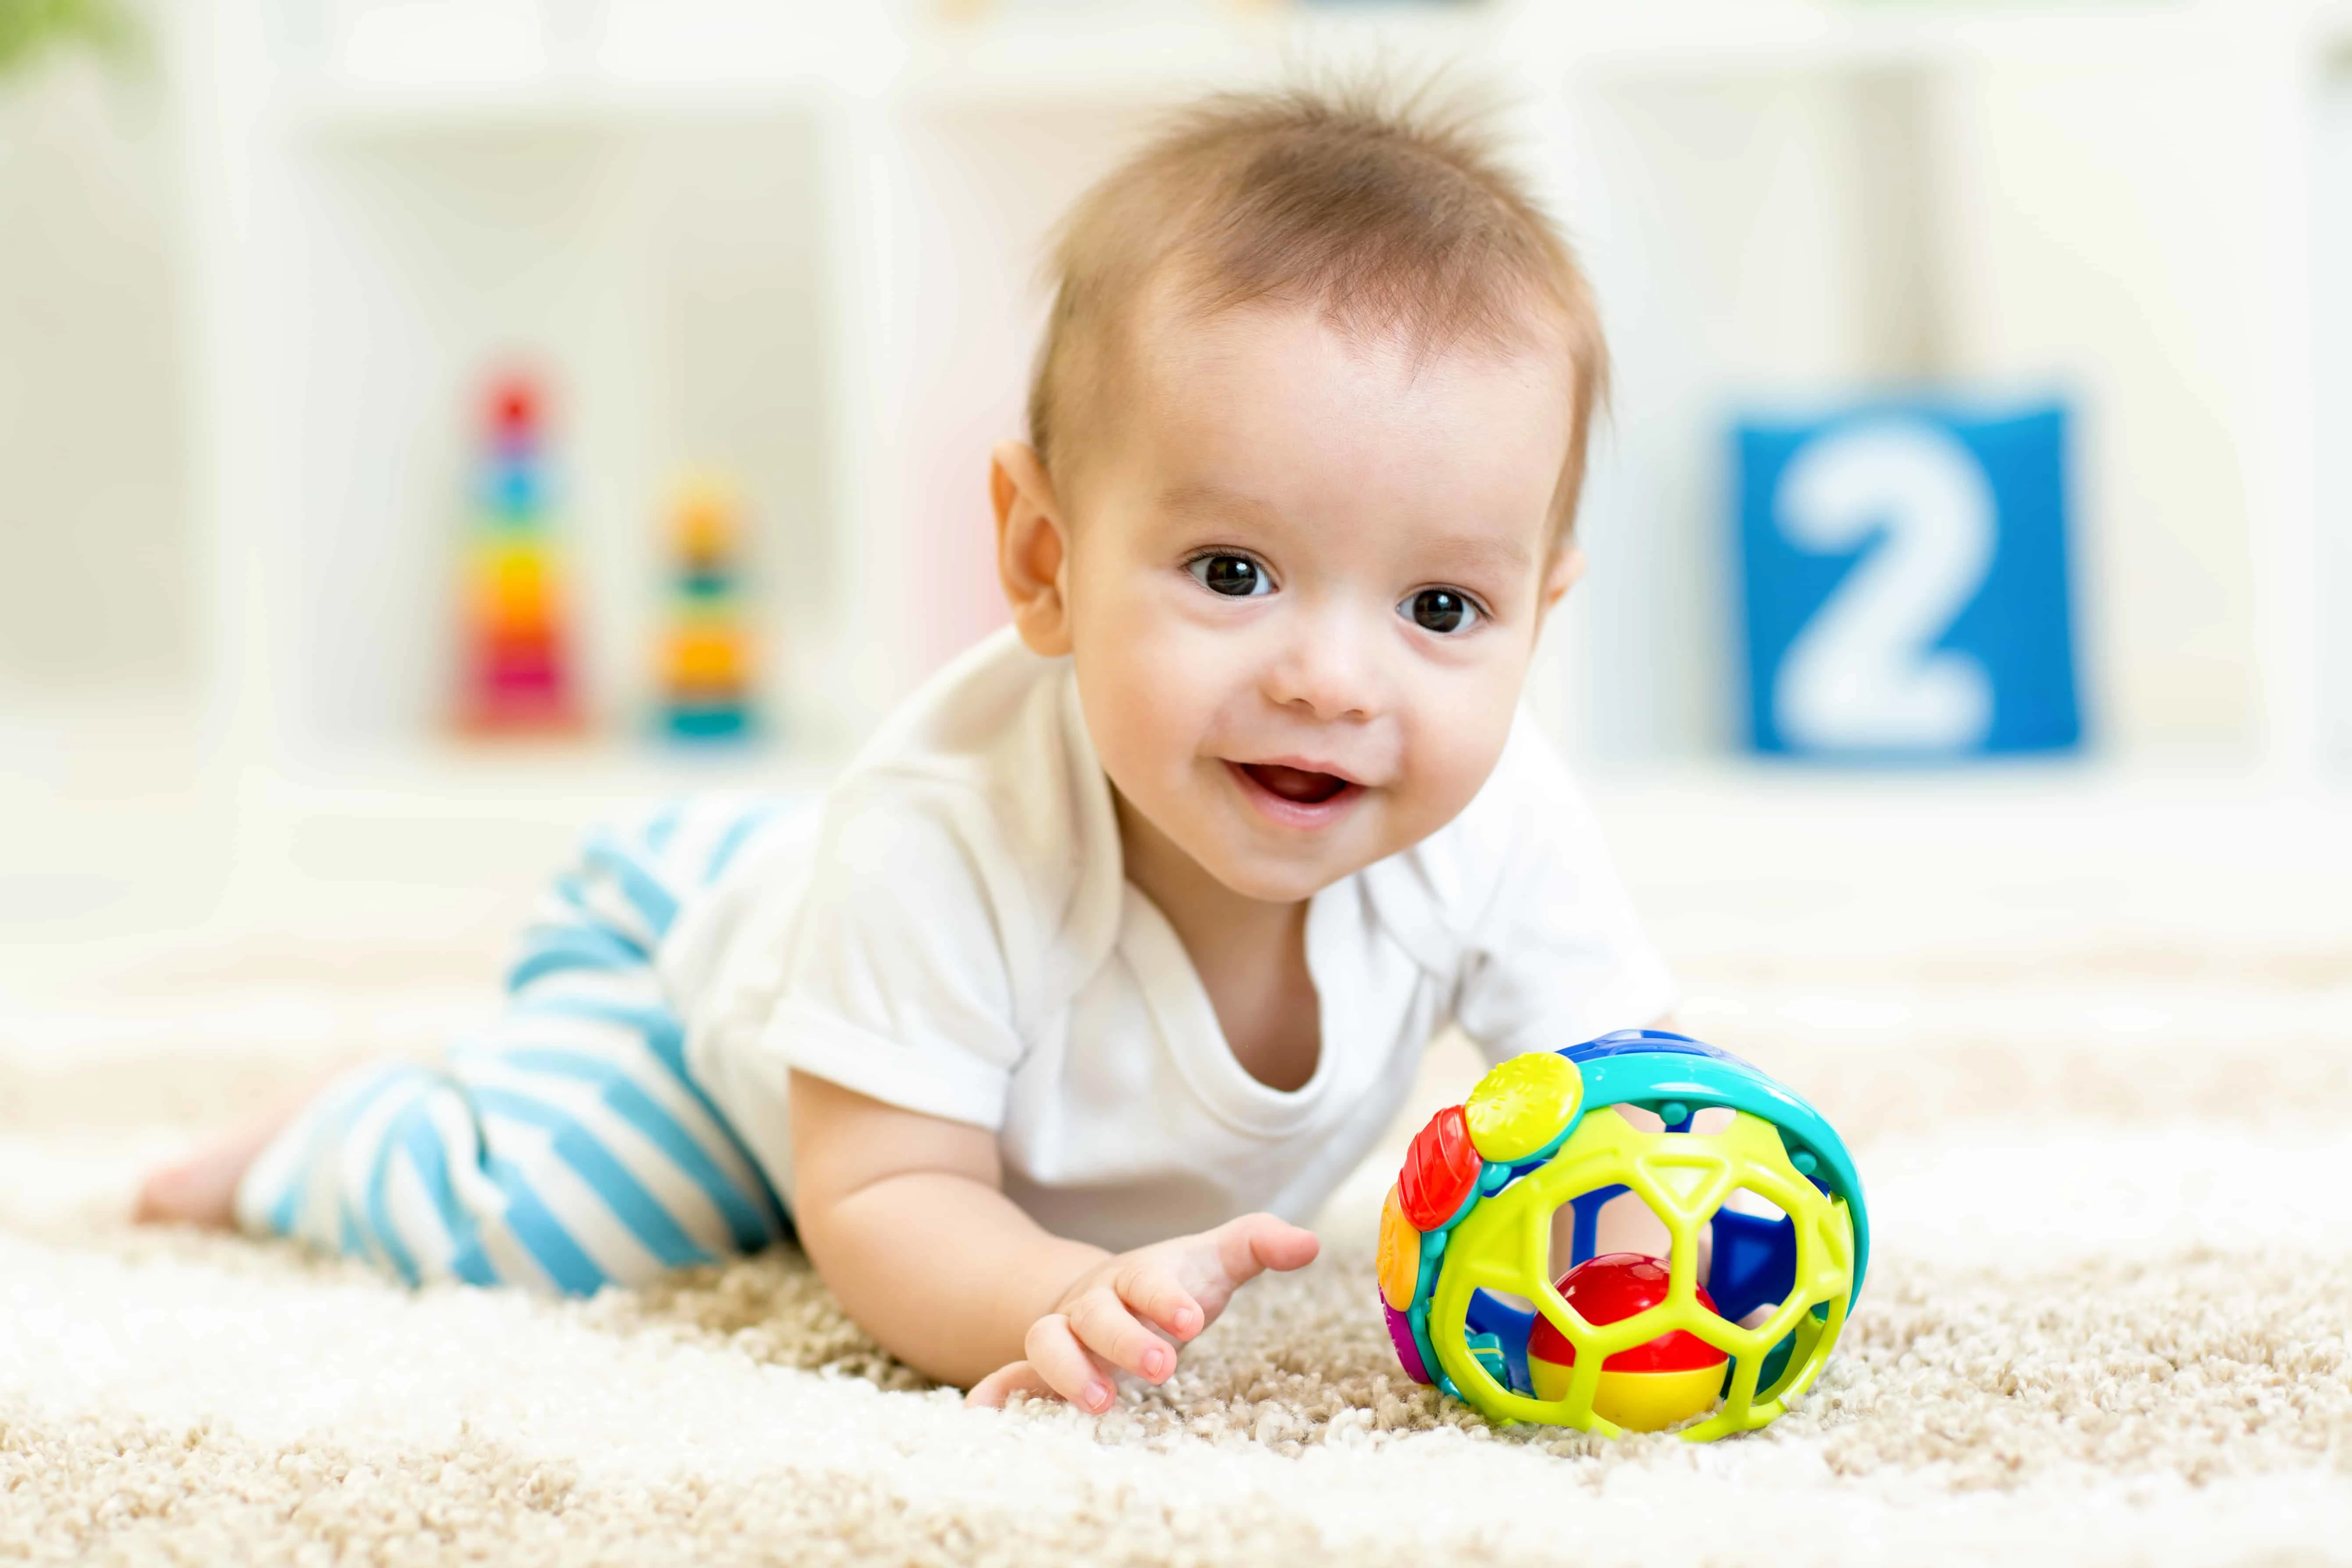 Motor Skills for Babies from 0-6 Months: Do you know what fine and gross motor skills to expect in your baby from 0-6 months? Read about fine and gross motor milestones from 0-6 months. Simple activities and ideas on how to encourage motor development in your baby.